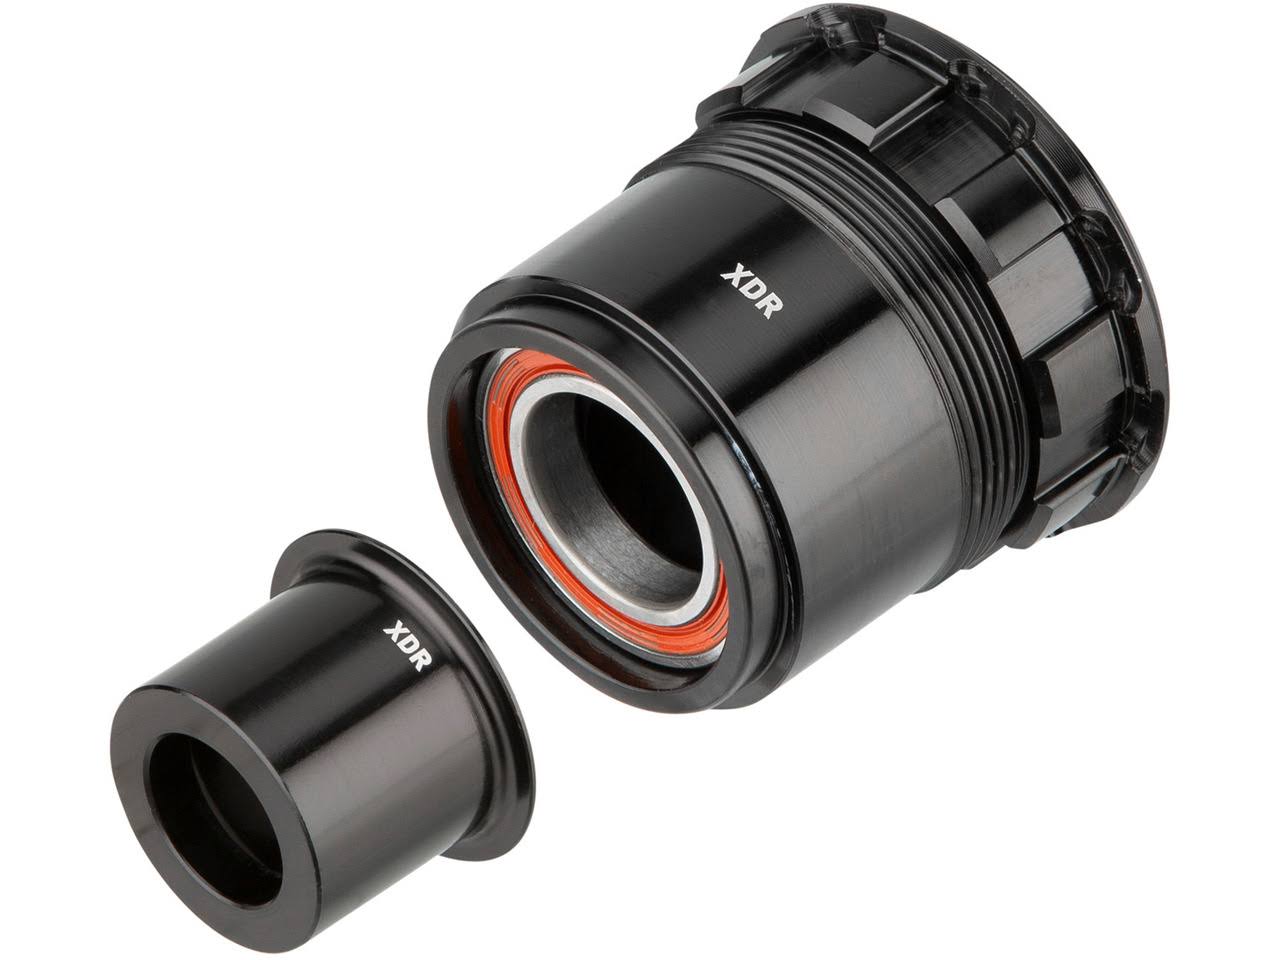 DT Swiss Ratchet Freehub Conversion Kit For SRAM XDR